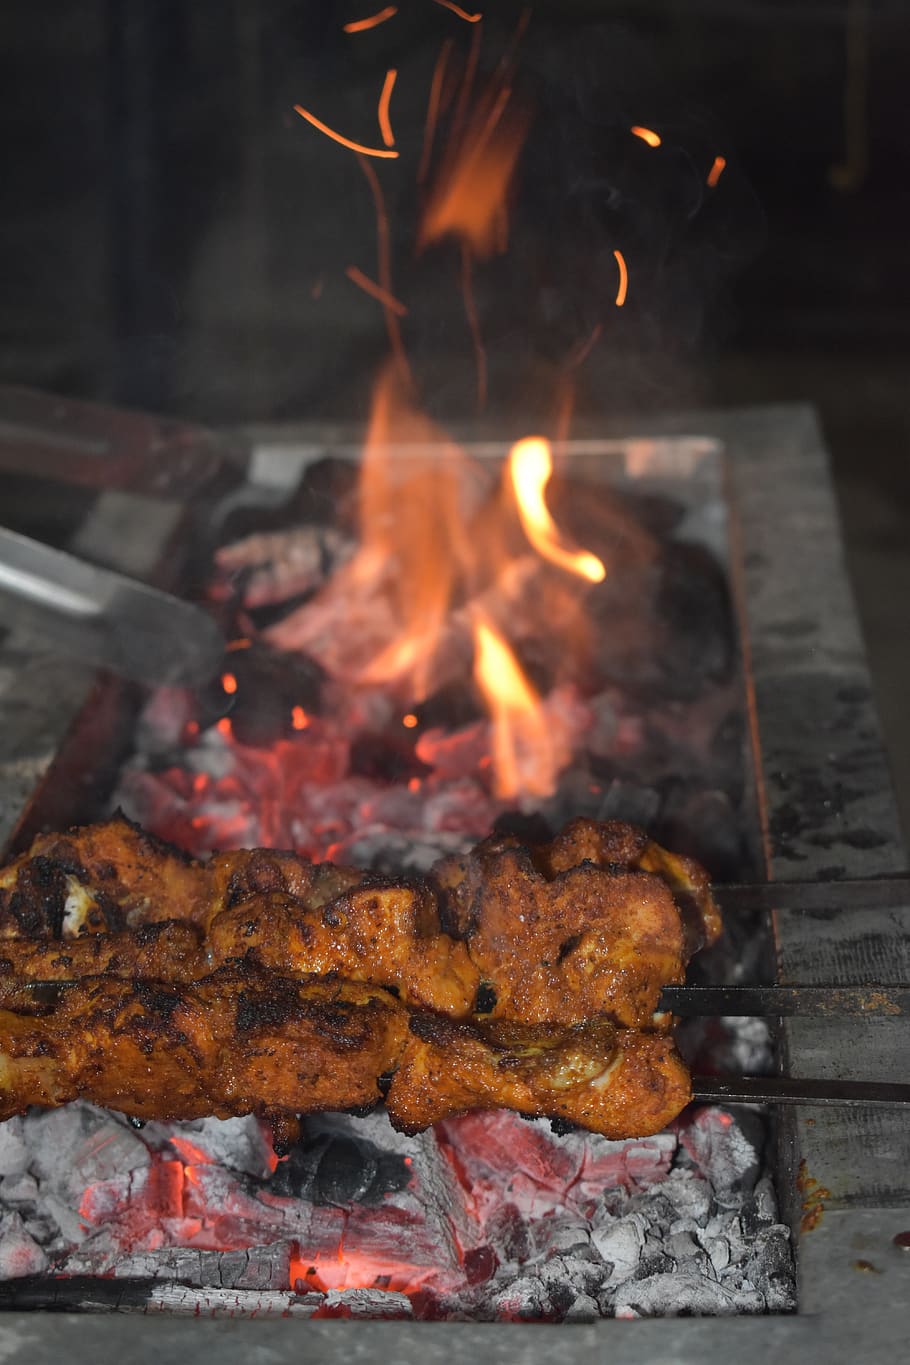 bbq, chicken, food, barbecue, meat, grilled, grill, meal, cooking, tasty